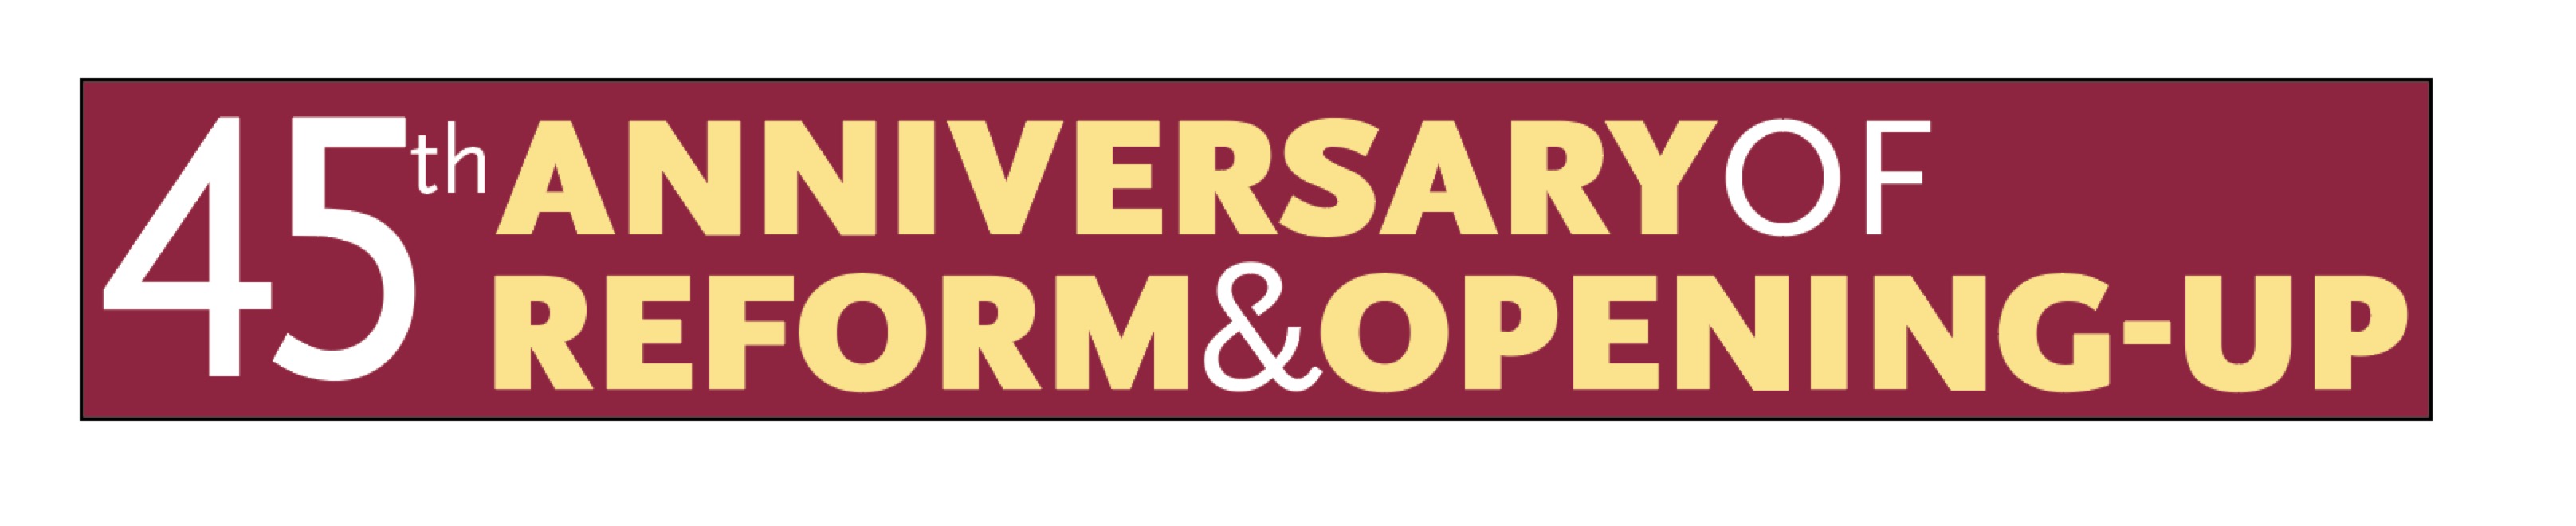 45th anniversary of reform and opening-up